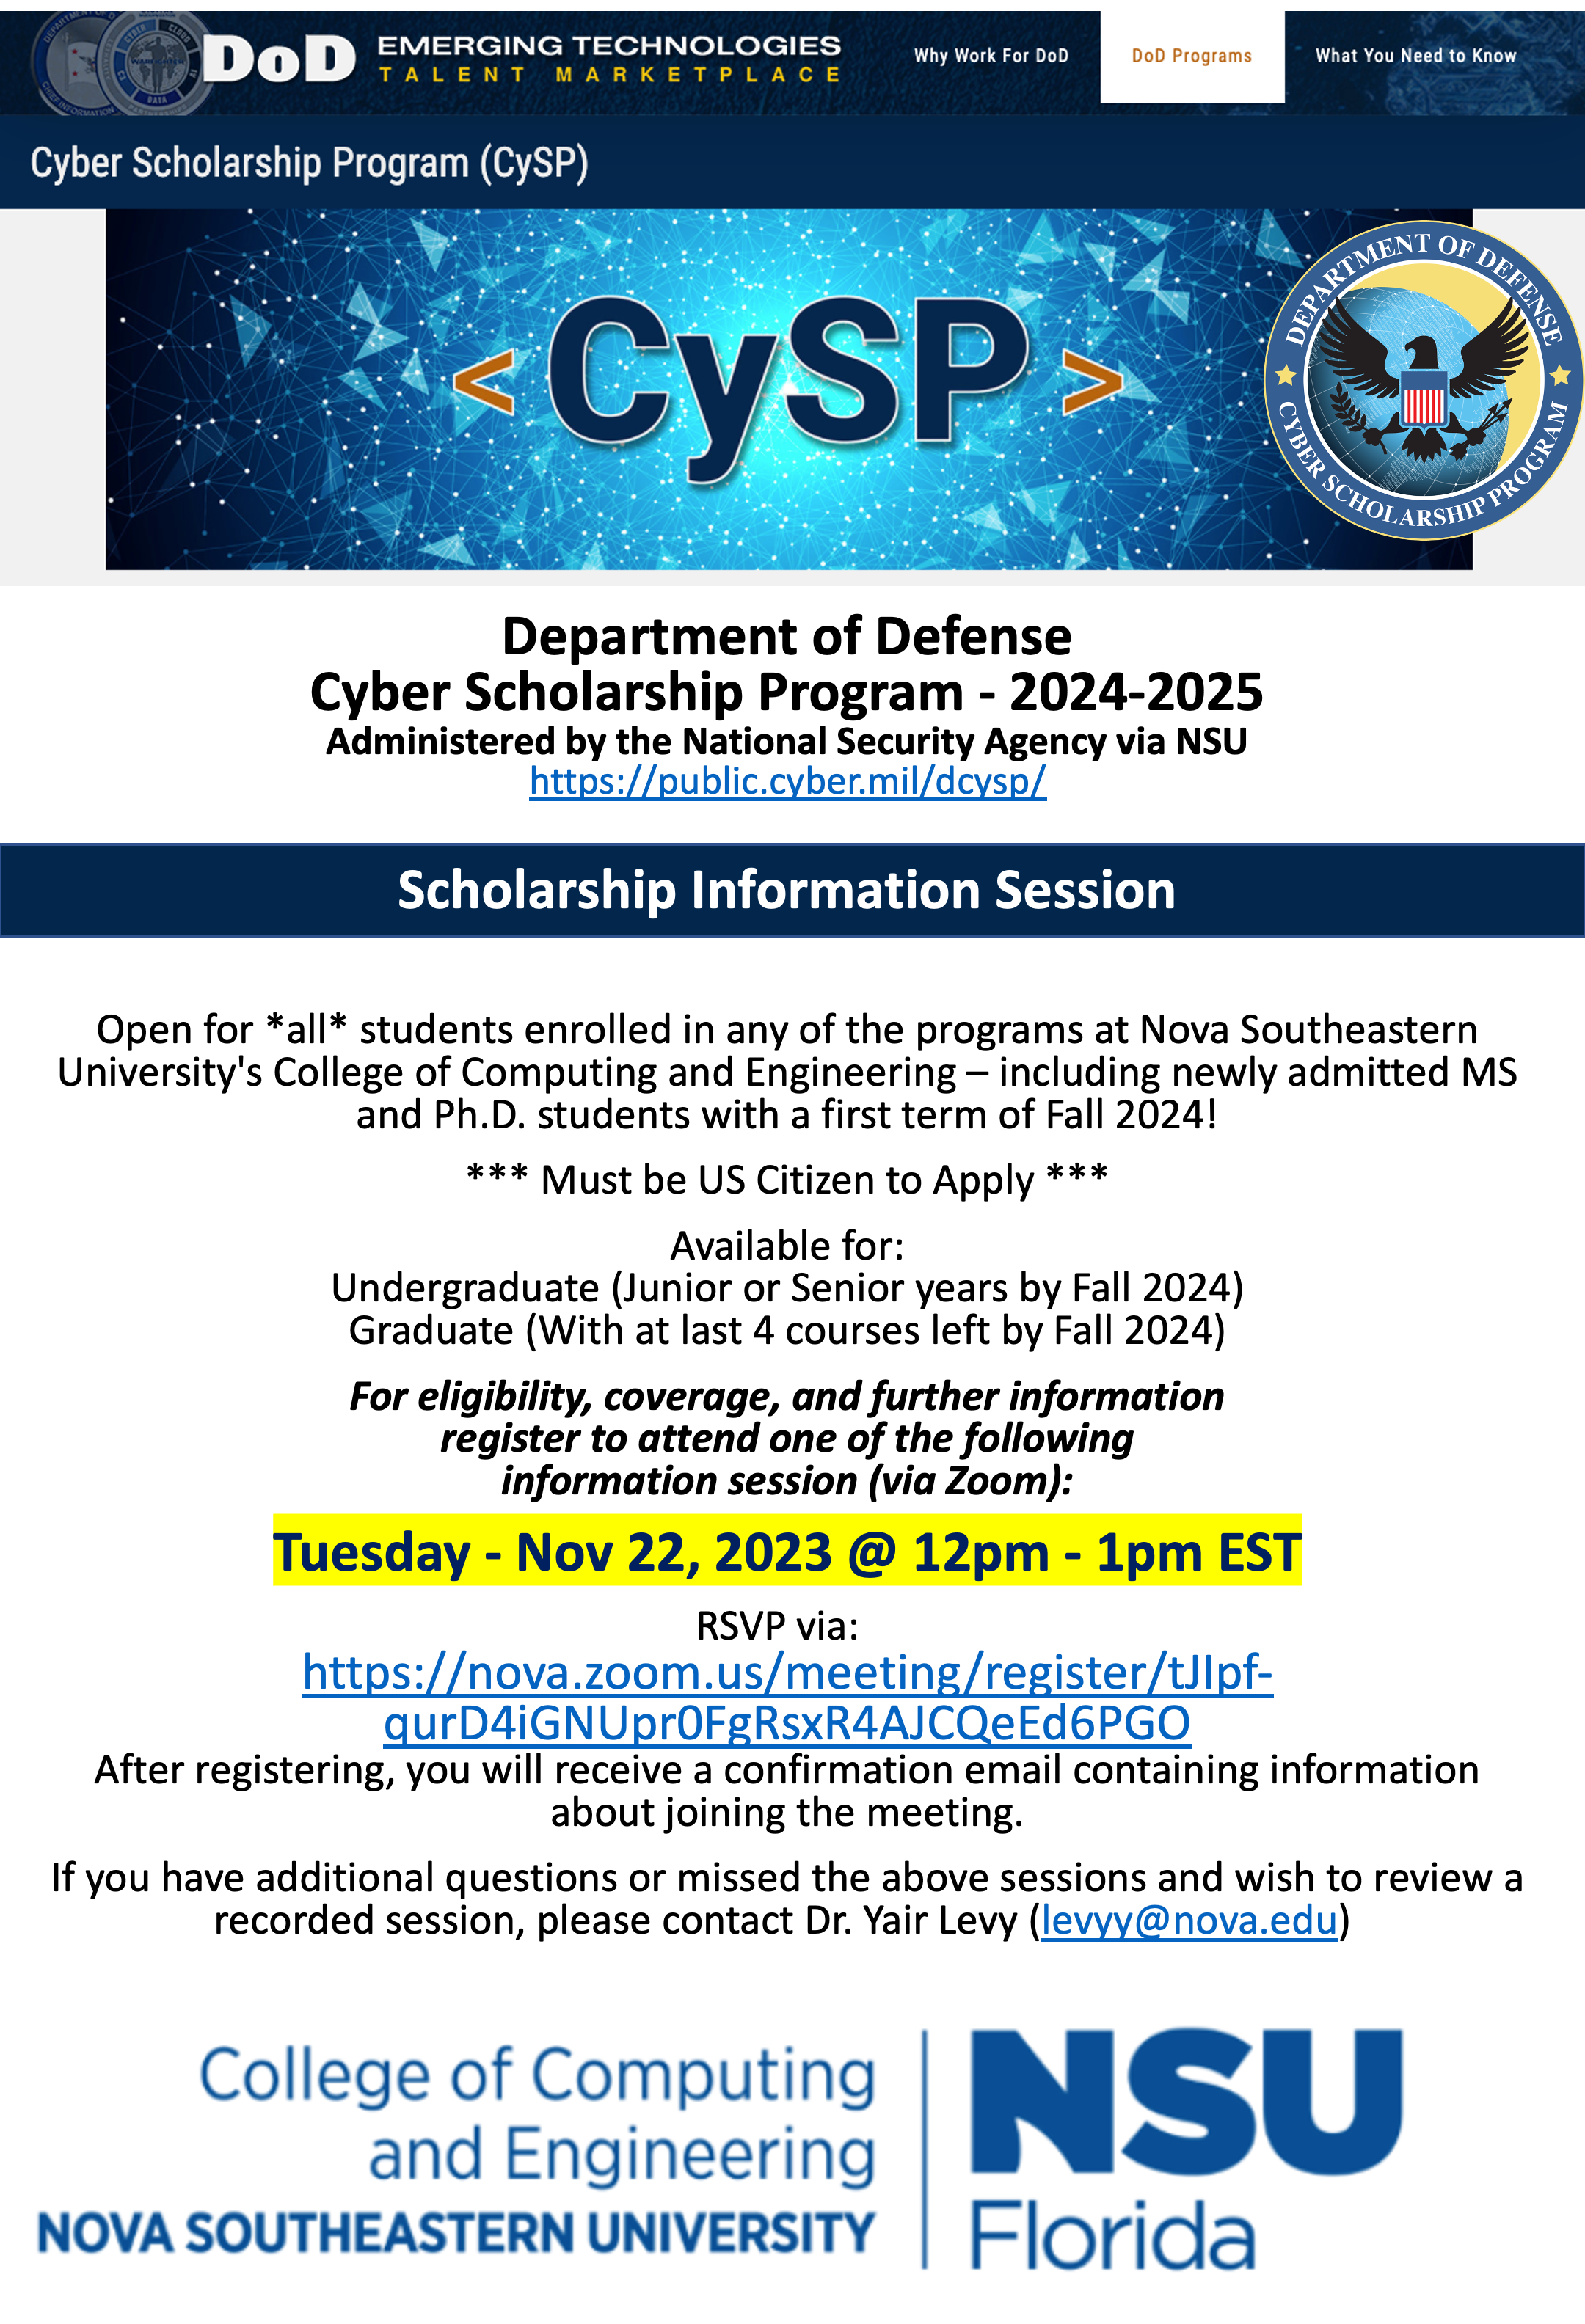 20231107_dod_cysp_flyer2024-2025_infosessions.png